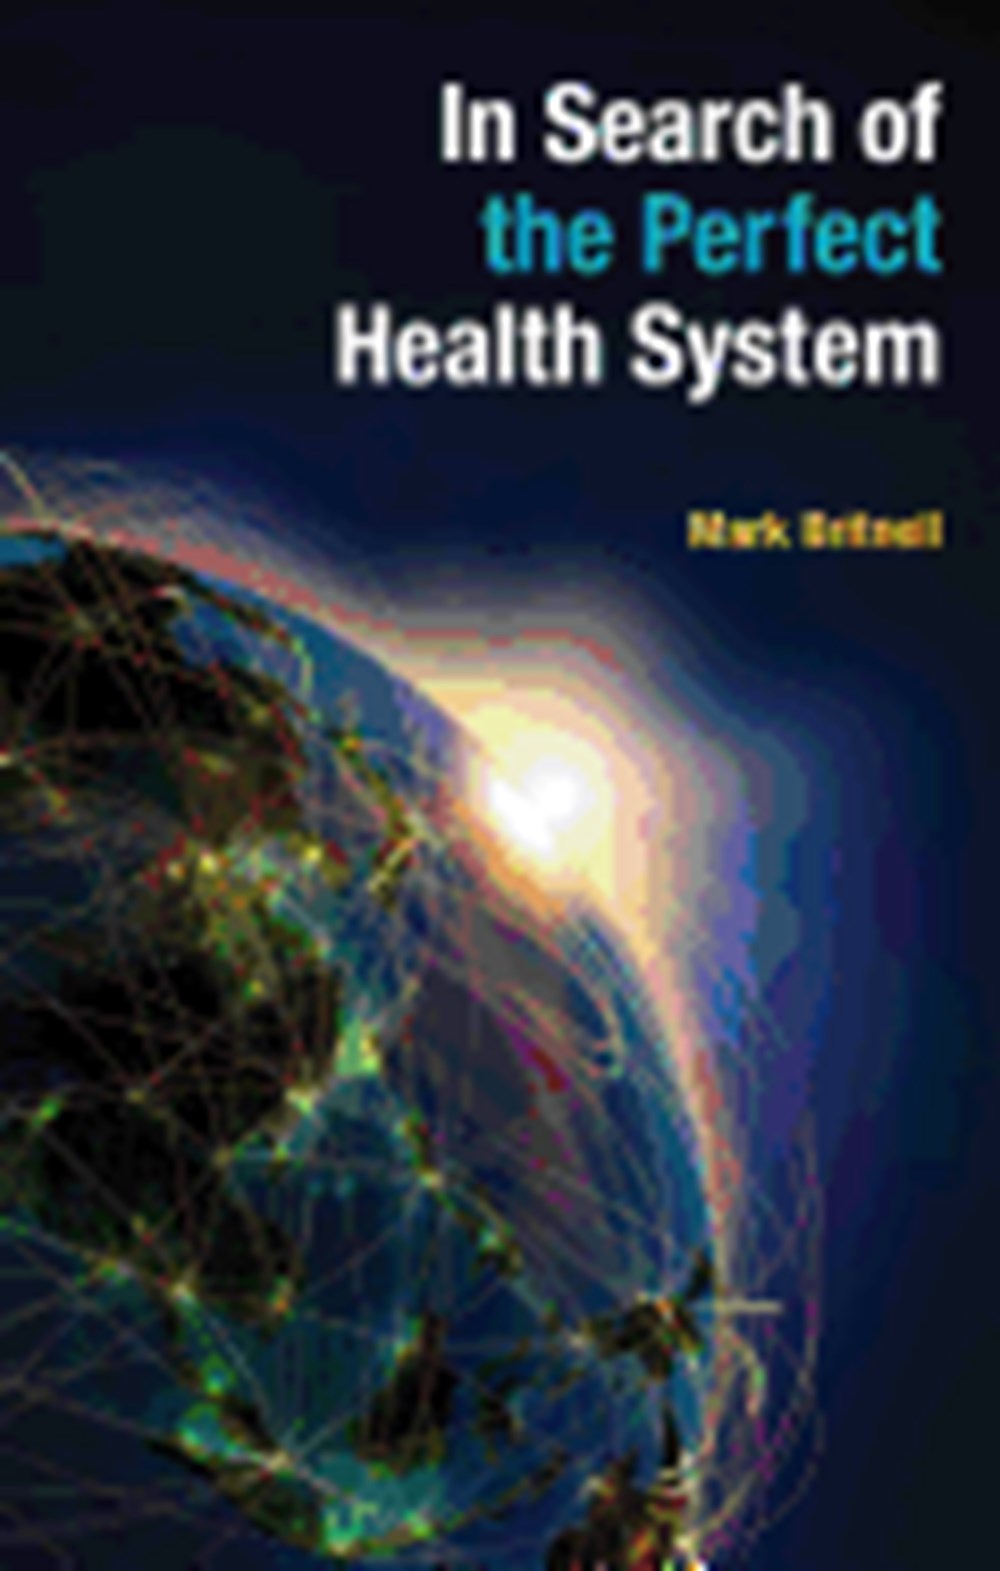 In Search of the Perfect Health System (2015)